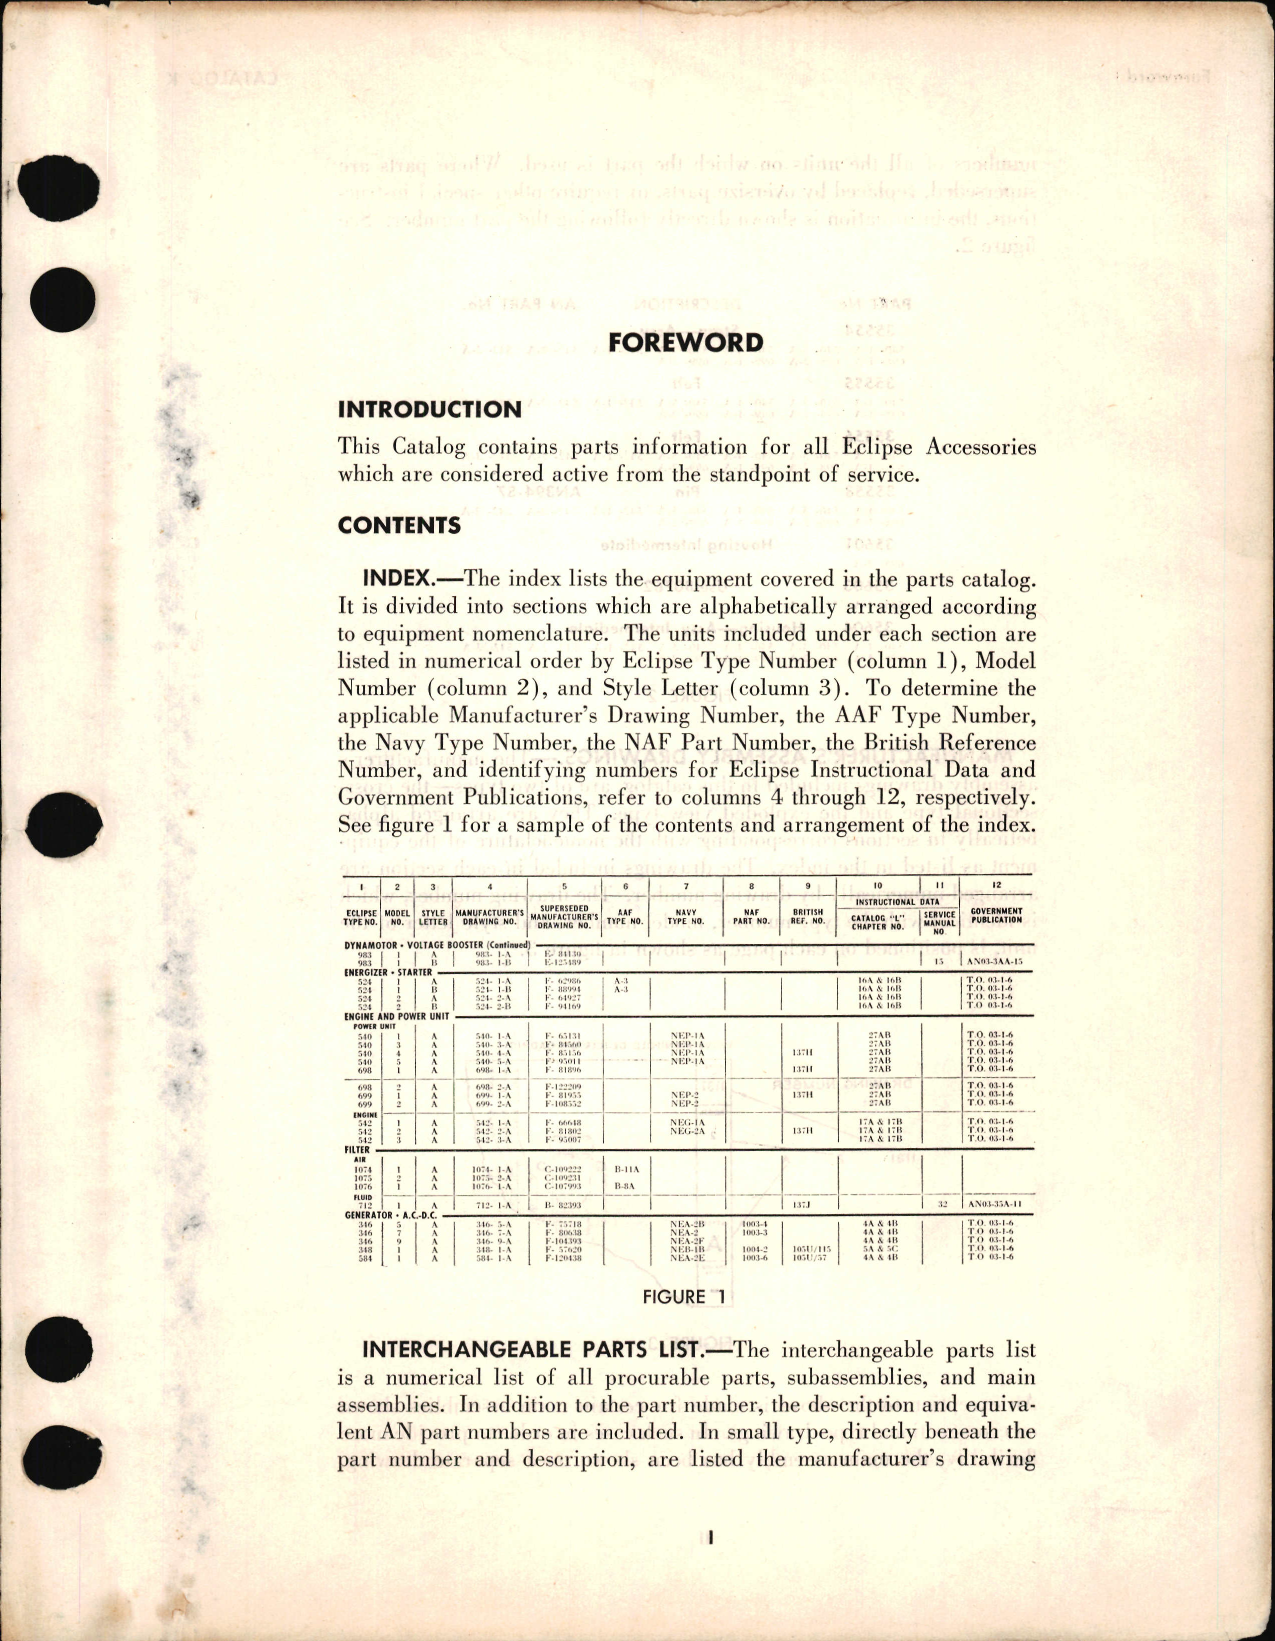 Sample page 6 from AirCorps Library document: Aircraft Accessory Equipment Parts Catalog